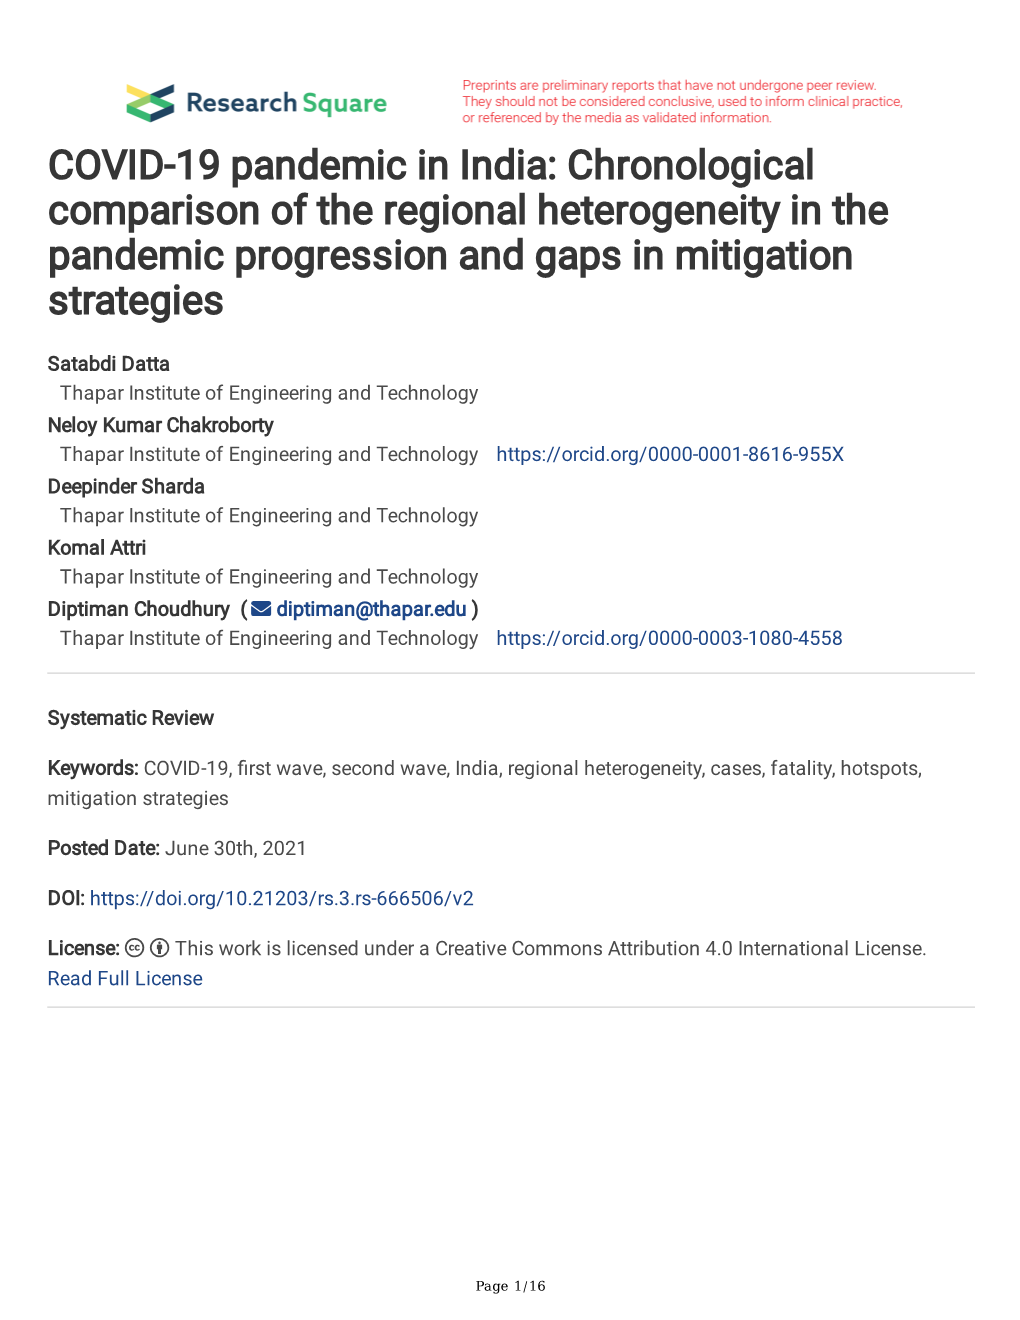 COVID-19 Pandemic in India: Chronological Comparison of the Regional Heterogeneity in the Pandemic Progression and Gaps in Mitigation Strategies